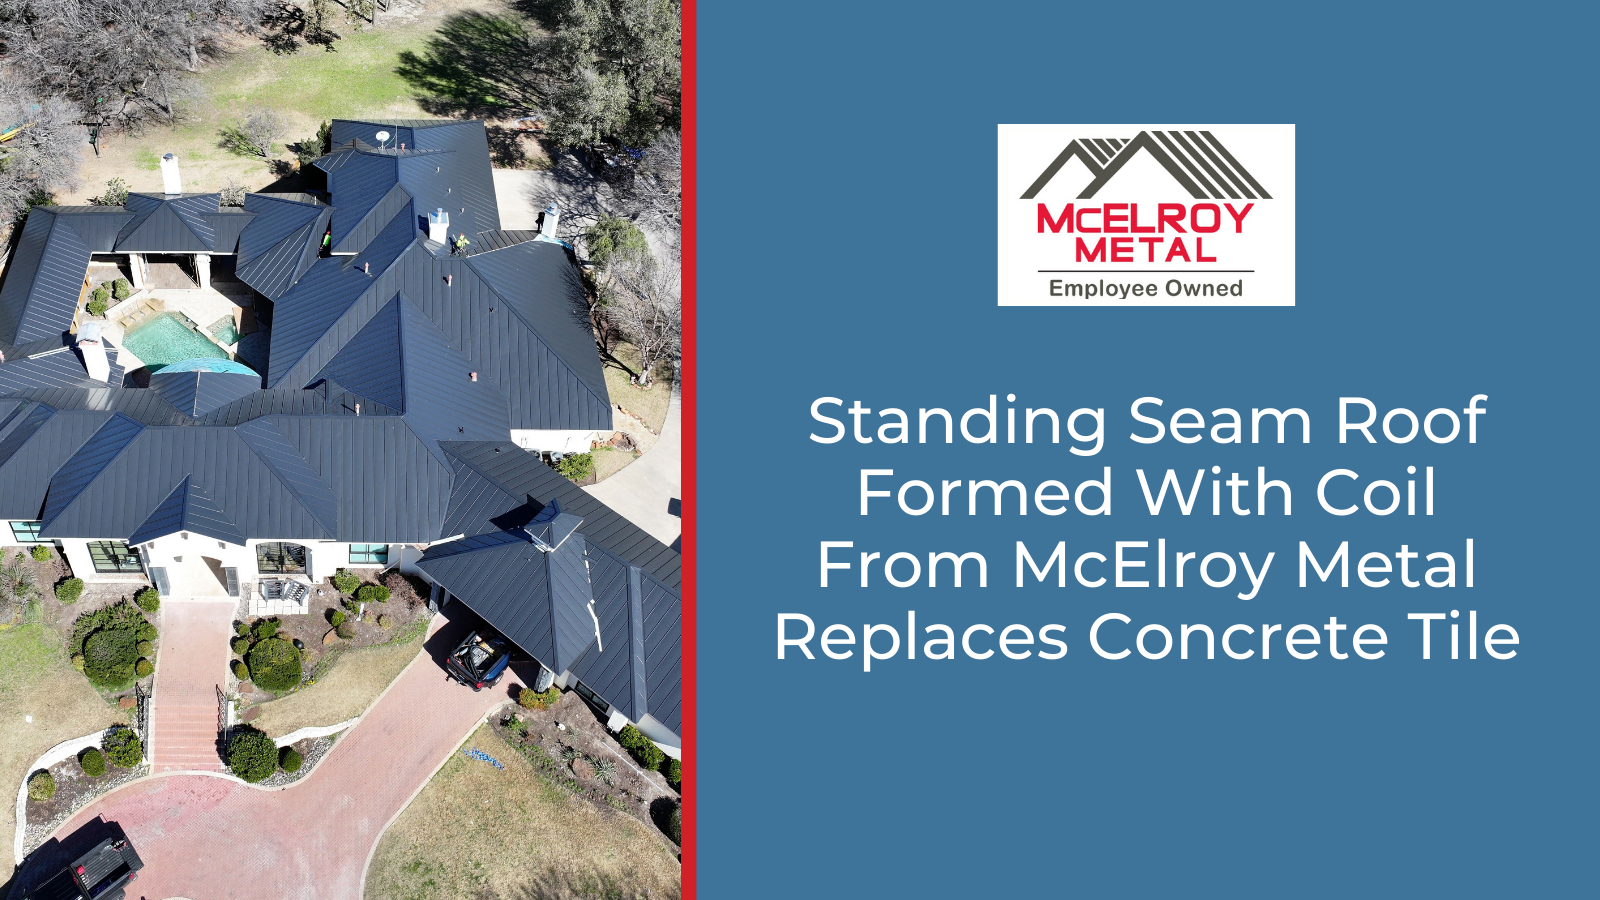 Standing Seam Roof Formed With Coil From McElroy Metal Replaces Concrete Tile